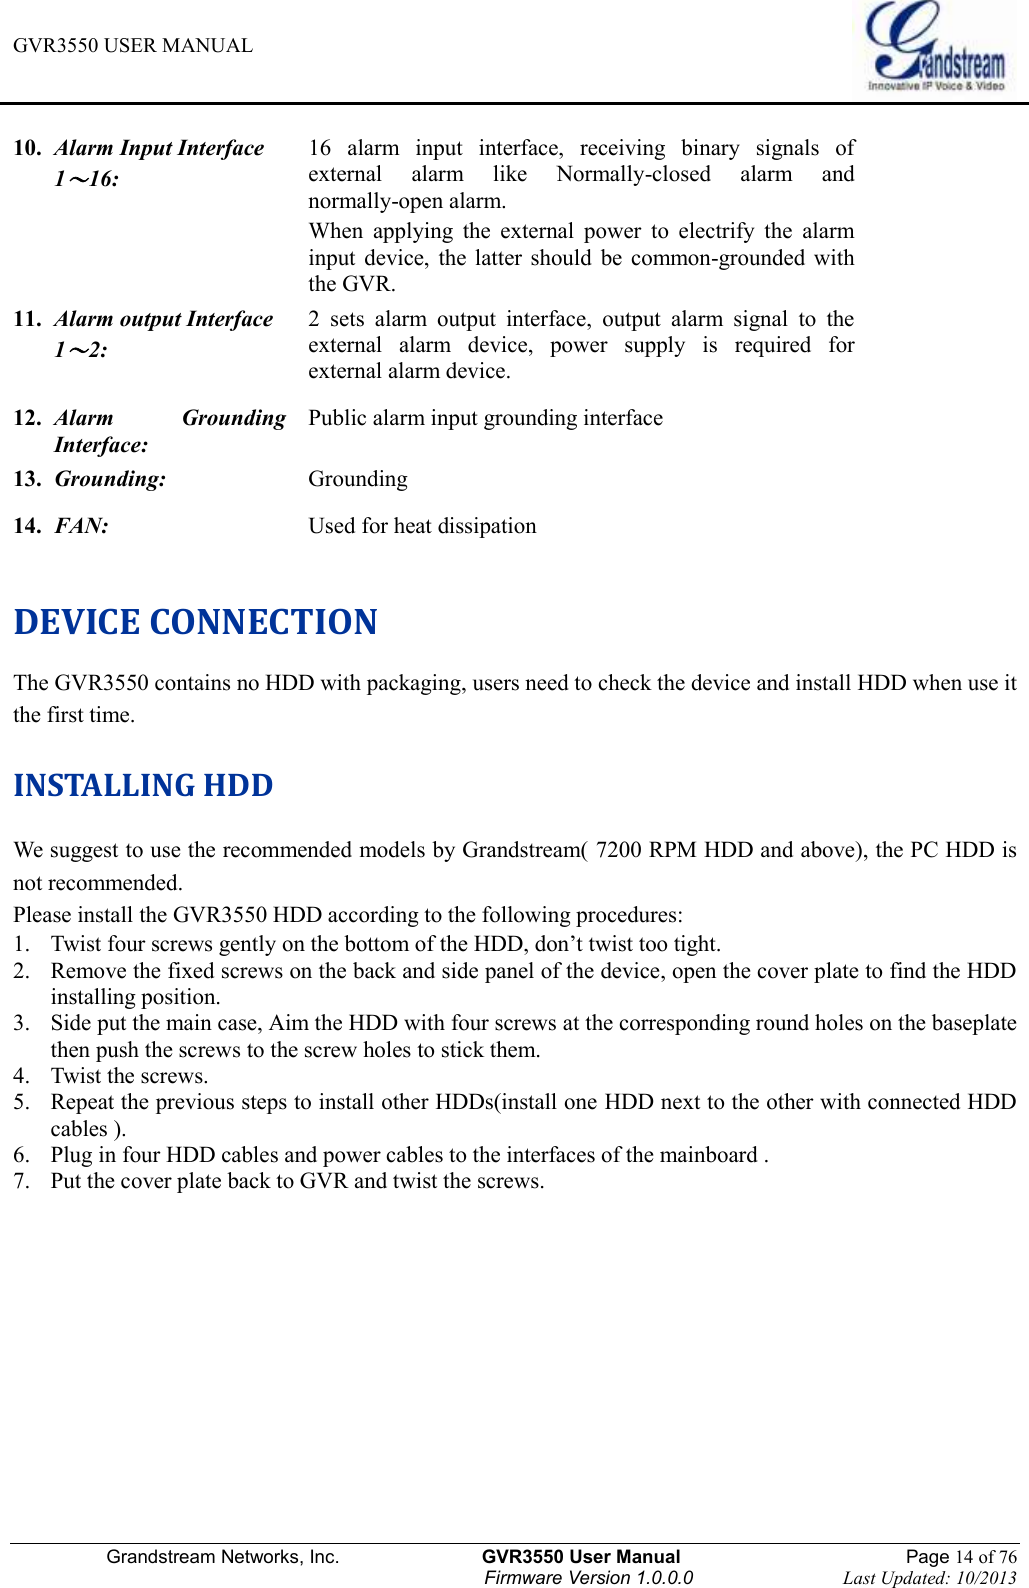 GVR3550 USER MANUAL   Grandstream Networks, Inc.                    GVR3550 User Manual                                                Page 14 of 76 Firmware Version 1.0.0.0                                Last Updated: 10/2013  10.   Alarm Input Interface 1～16: 16  alarm  input  interface,  receiving  binary  signals  of external  alarm  like  Normally-closed  alarm  and normally-open alarm. When  applying  the  external  power  to  electrify  the  alarm input  device,  the  latter  should  be  common-grounded  with   the GVR. 11.   Alarm output Interface 1～2:  2  sets  alarm  output  interface,  output  alarm  signal  to  the external  alarm  device,  power  supply  is  required  for external alarm device. 12.   Alarm  Grounding Interface: Public alarm input grounding interface 13.   Grounding: Grounding   14.   FAN: Used for heat dissipation  DEVICE CONNECTION The GVR3550 contains no HDD with packaging, users need to check the device and install HDD when use it the first time. INSTALLING HDD We suggest to use the recommended models by Grandstream( 7200 RPM HDD and above), the PC HDD is not recommended. Please install the GVR3550 HDD according to the following procedures: 1. Twist four screws gently on the bottom of the HDD, don’t twist too tight. 2. Remove the fixed screws on the back and side panel of the device, open the cover plate to find the HDD installing position. 3. Side put the main case, Aim the HDD with four screws at the corresponding round holes on the baseplate then push the screws to the screw holes to stick them.   4. Twist the screws. 5. Repeat the previous steps to install other HDDs(install one HDD next to the other with connected HDD cables ). 6. Plug in four HDD cables and power cables to the interfaces of the mainboard . 7. Put the cover plate back to GVR and twist the screws.   